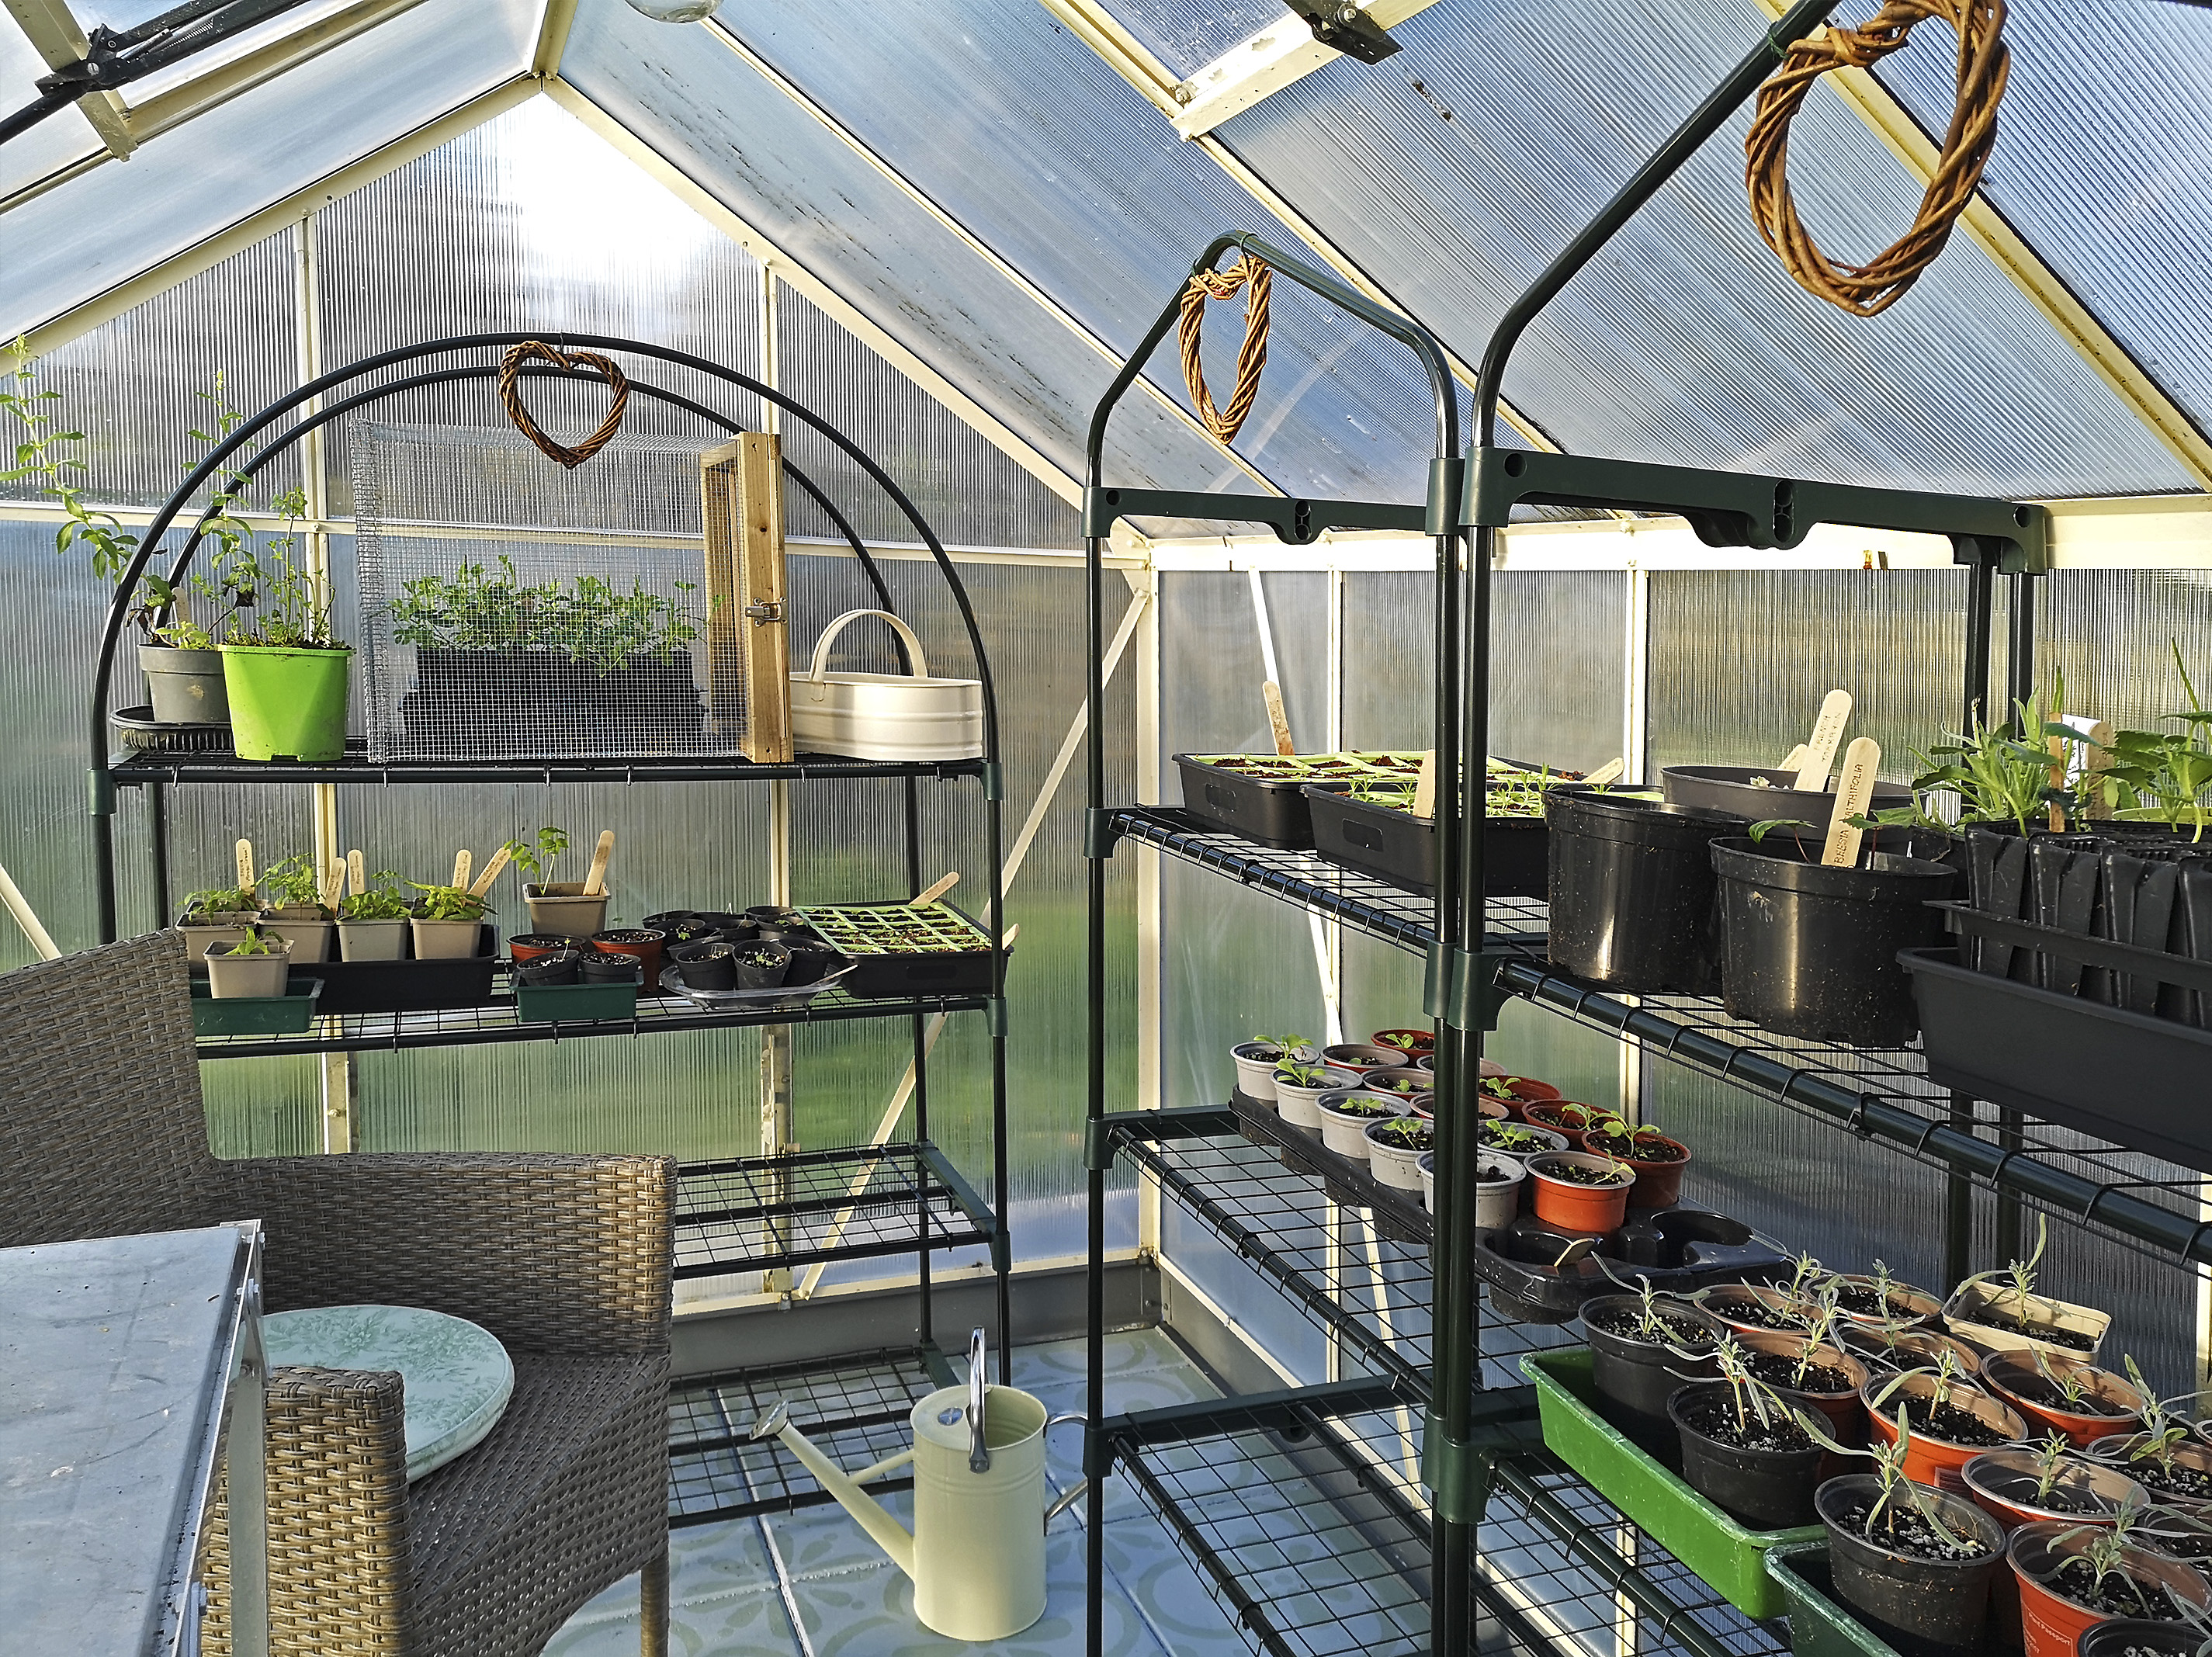 The House that Will | Greenhouse Renovation